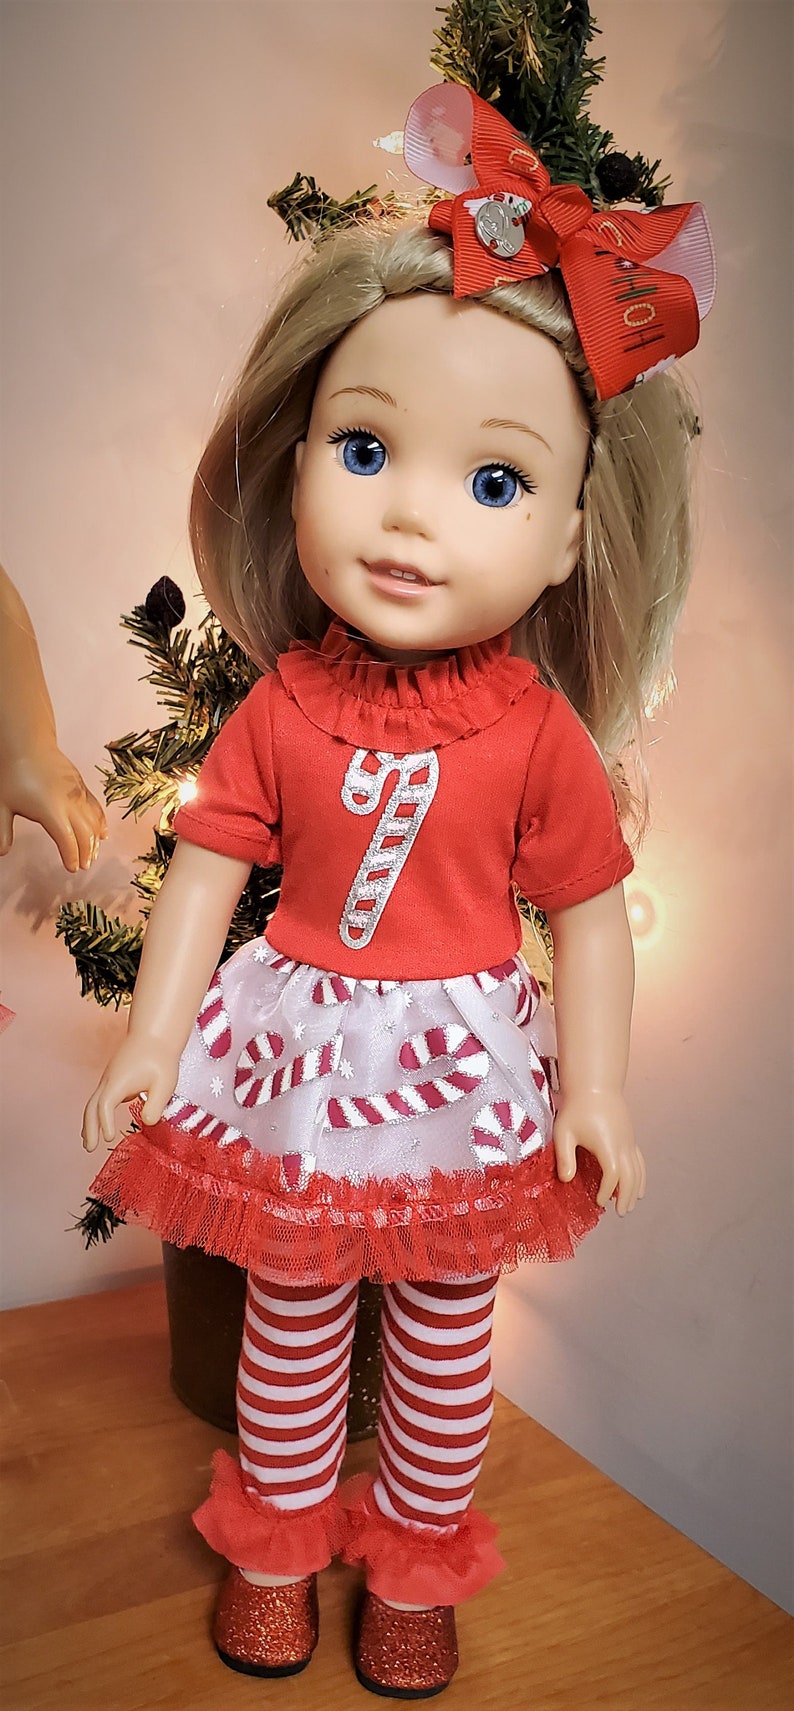 Matching Candy Cane Christmas Dress for the Wellie Wisher Doll | Etsy